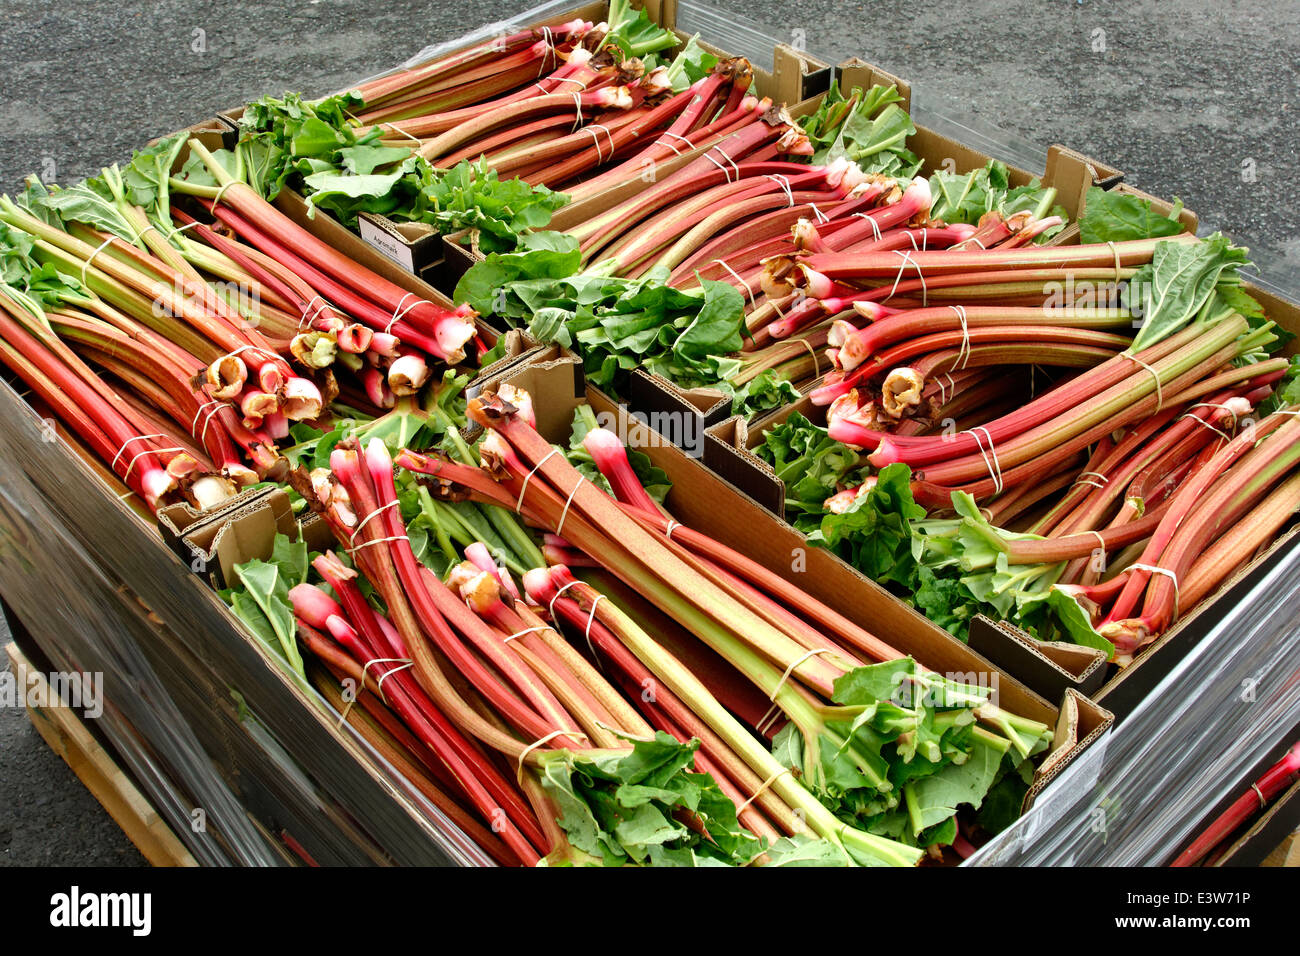 Rhubarb bunches, packed into boxes. Stock Photo